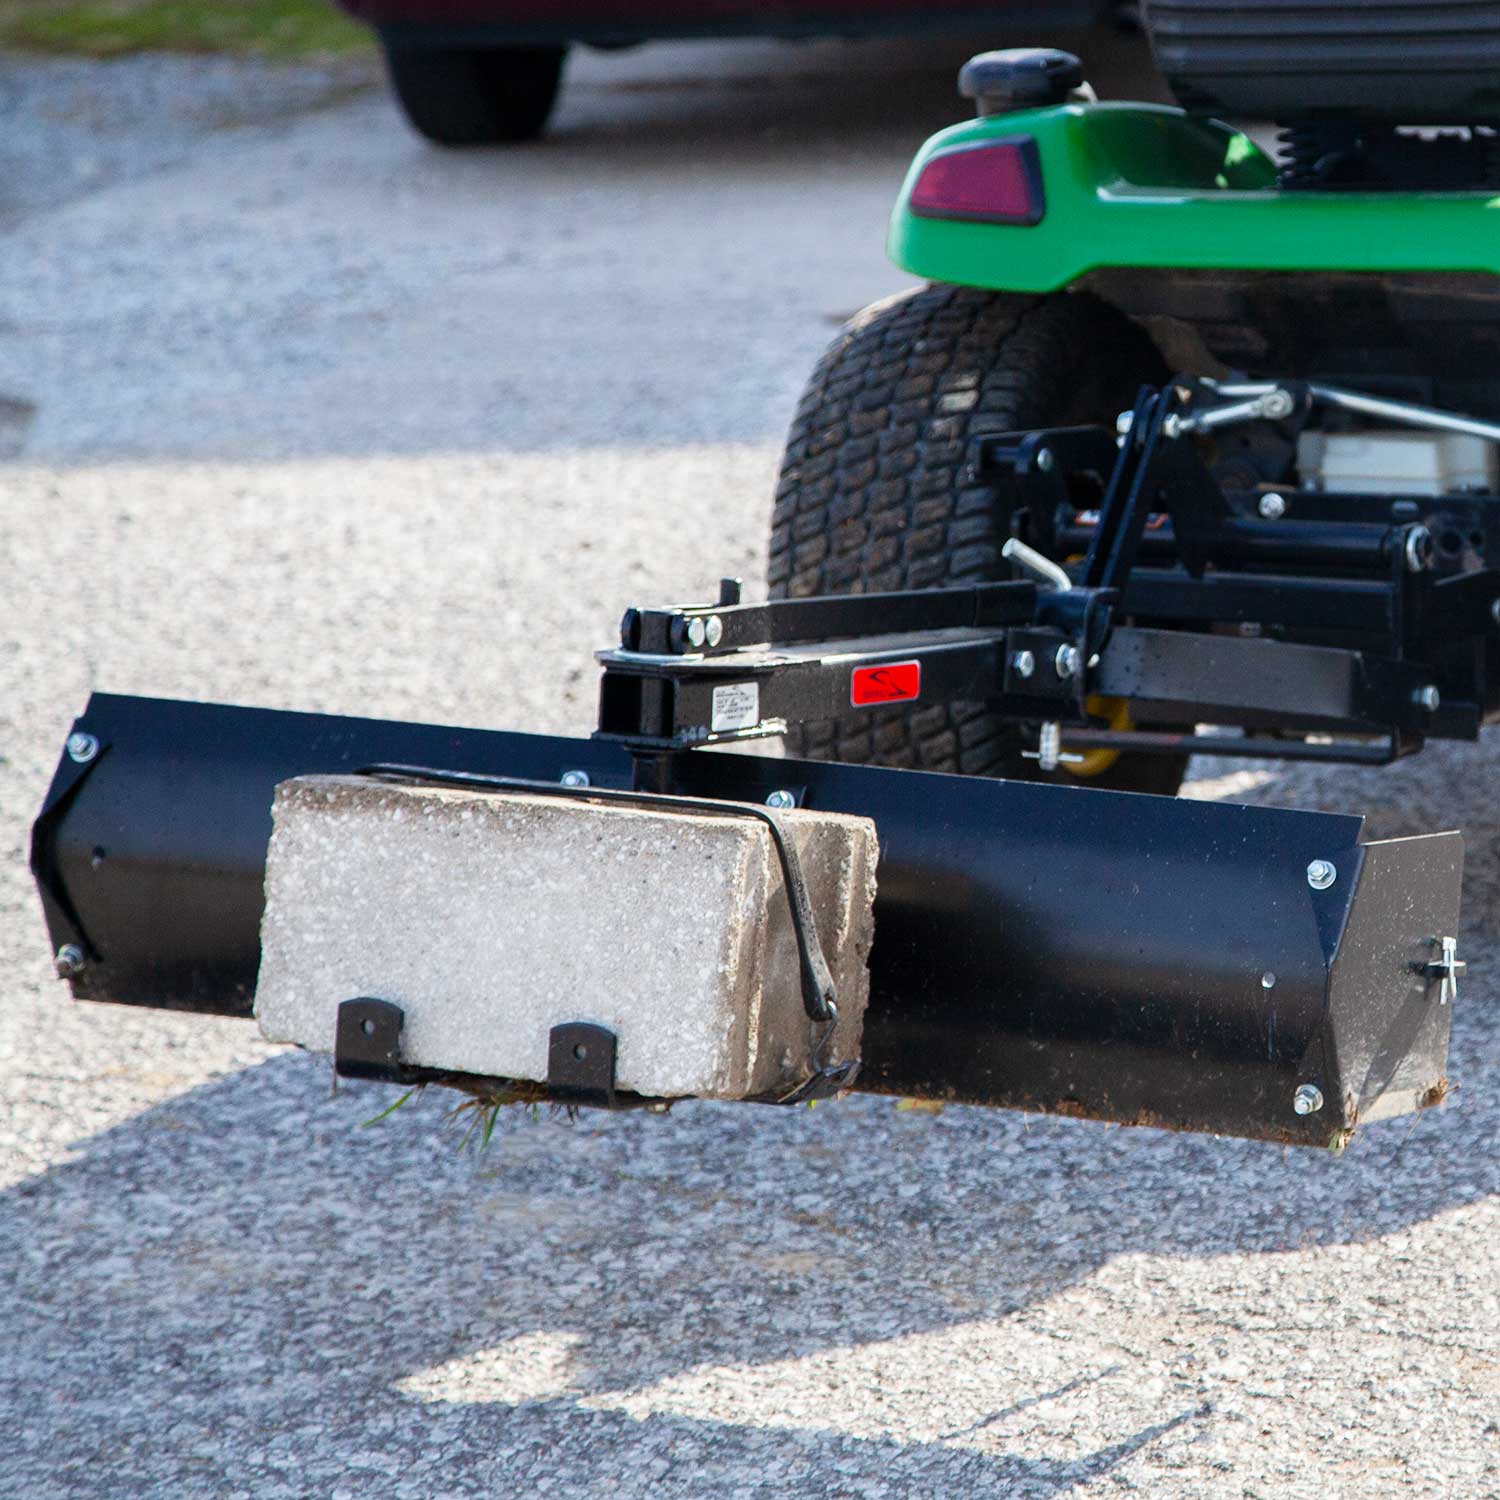 Details about   Garden Tractor Sleeve Hitch Tow Behind Rear Blade for Grading & Backfilling 42" 